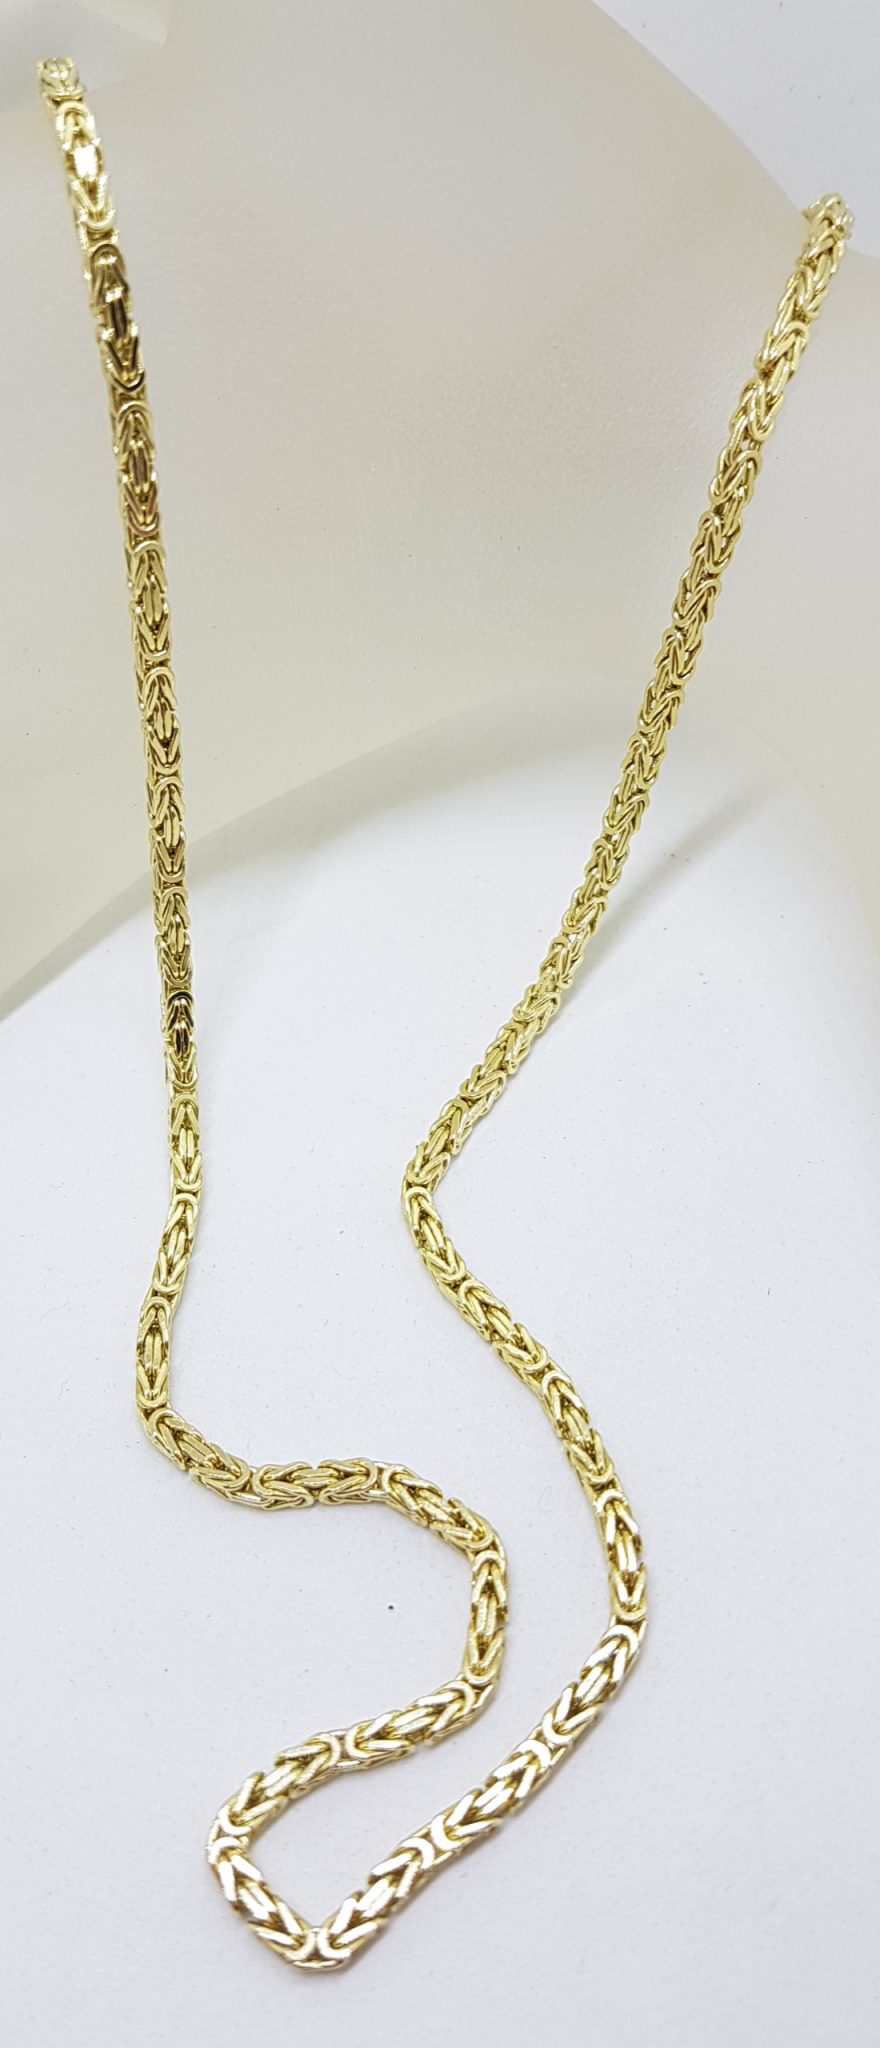 * SOLD * 9ct Yellow Gold Thick Unusual Link Necklace / Chain – Alexa's ...